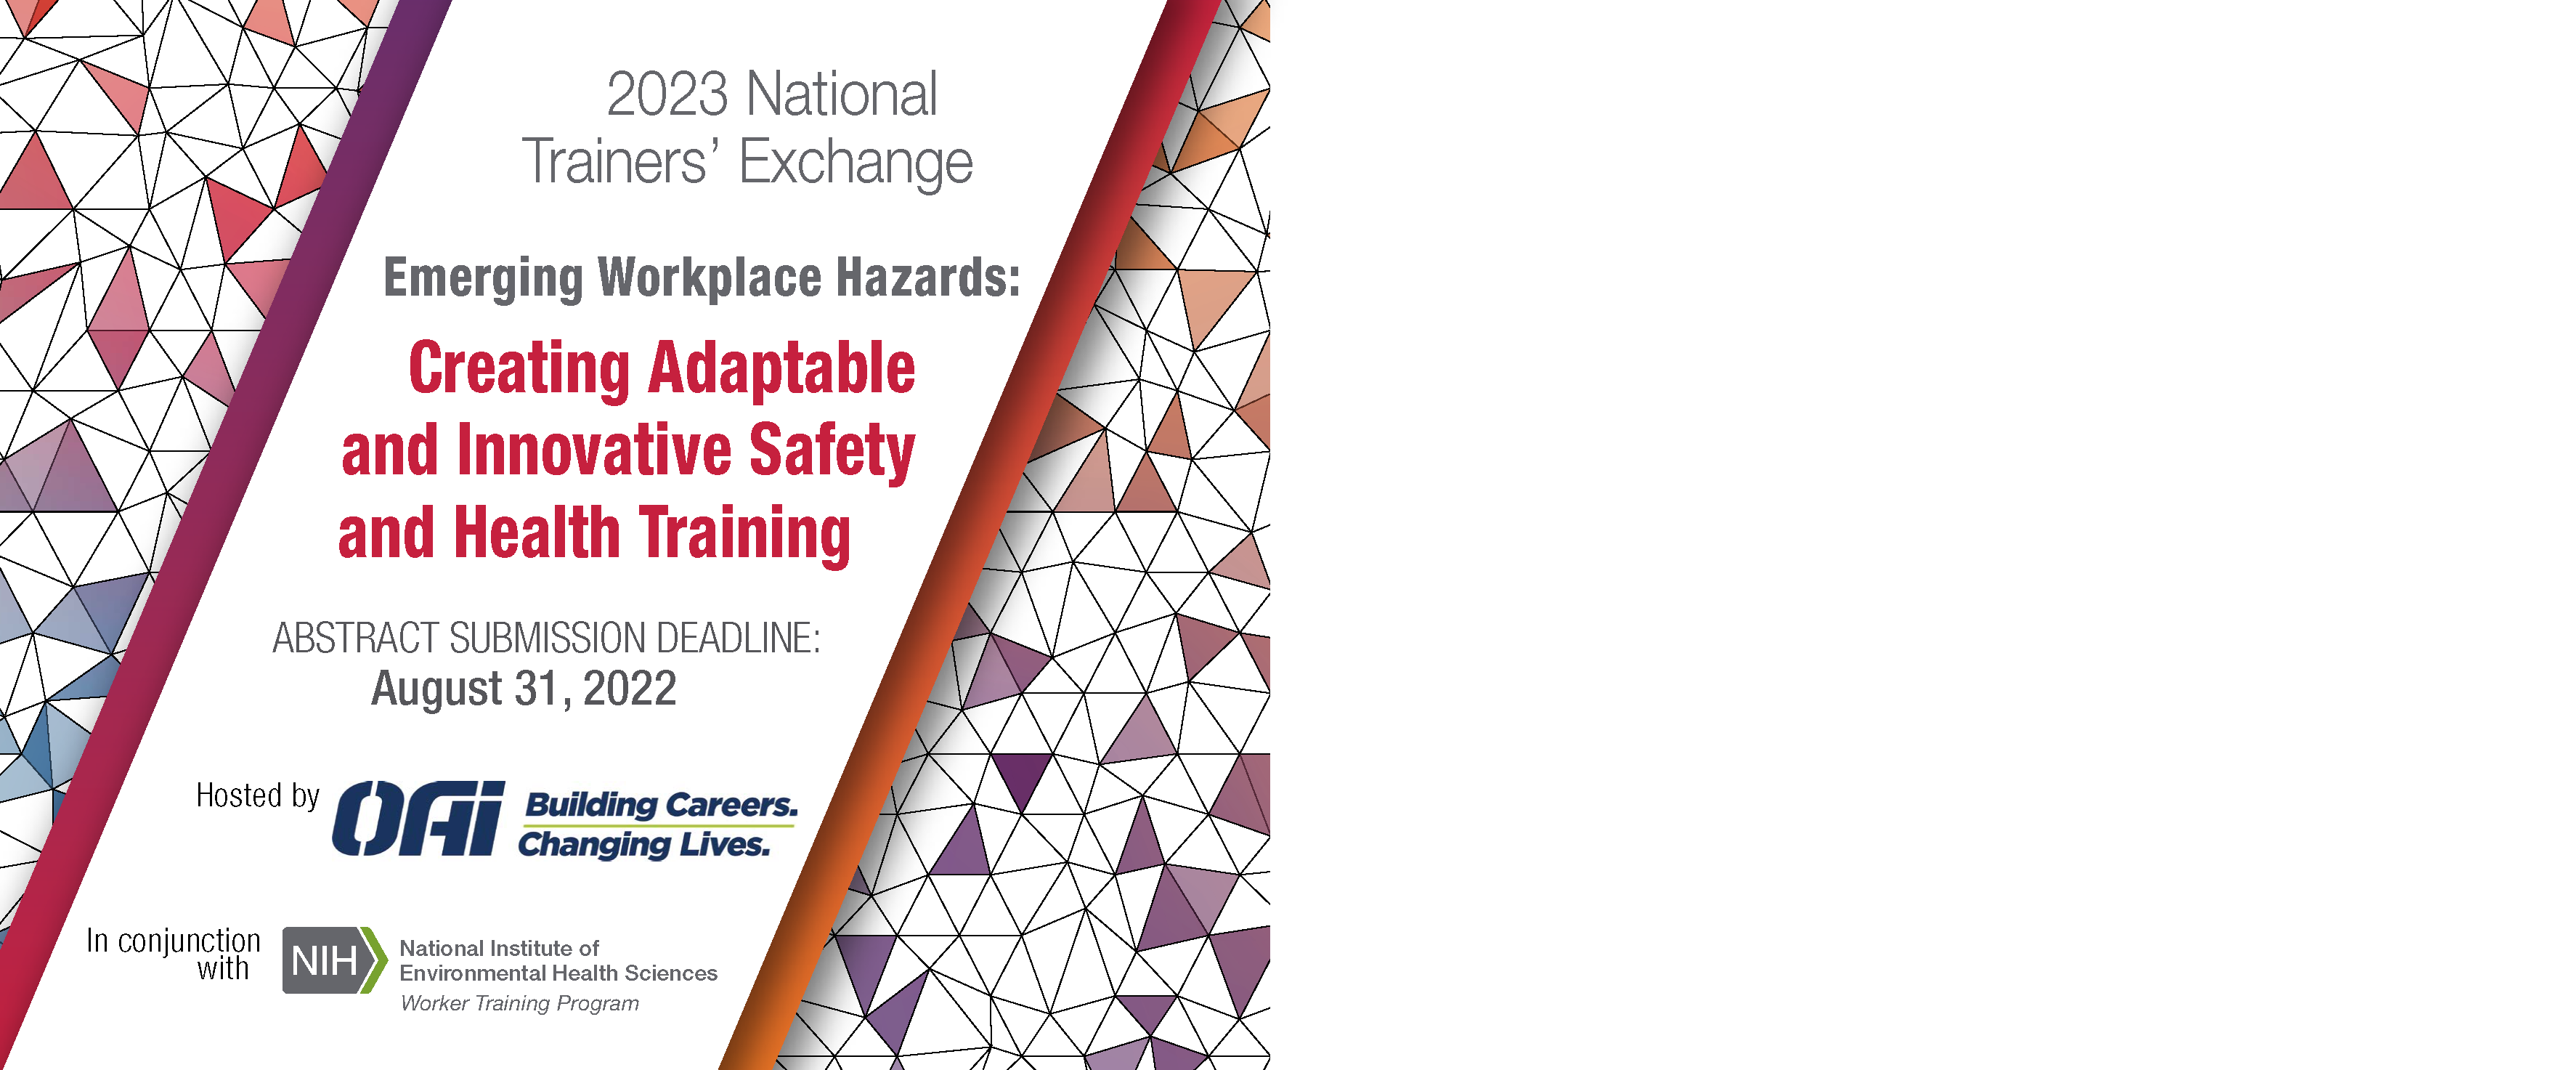 2023 National Trainers' Exchange will be held on May 2, 3, and 4, 2023 in Indianapolis, Indiana. Abstract submission deadline is August 31, 2022 at 11:59 p.m. EDT